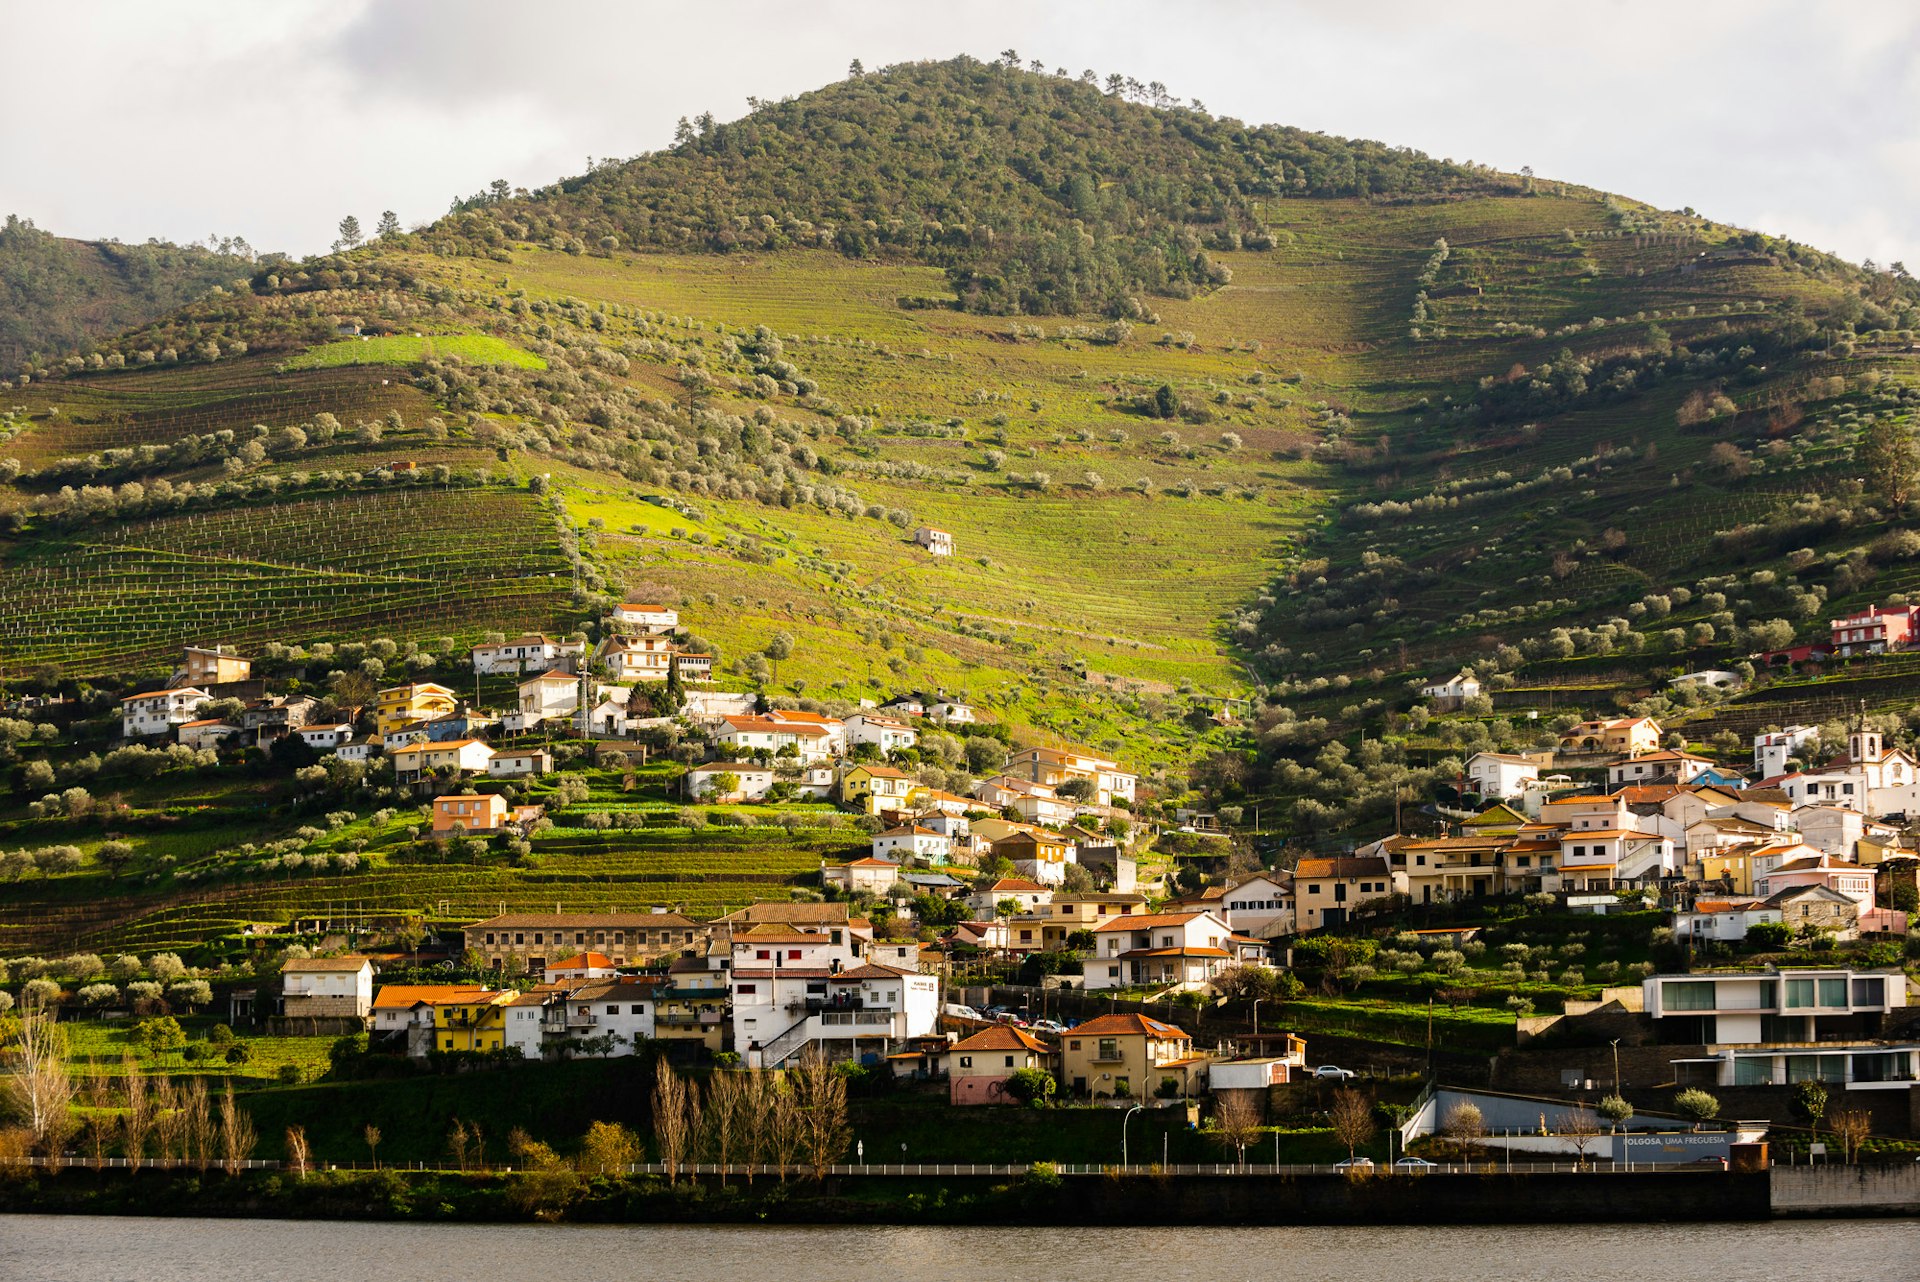 Views of the Douro Valley